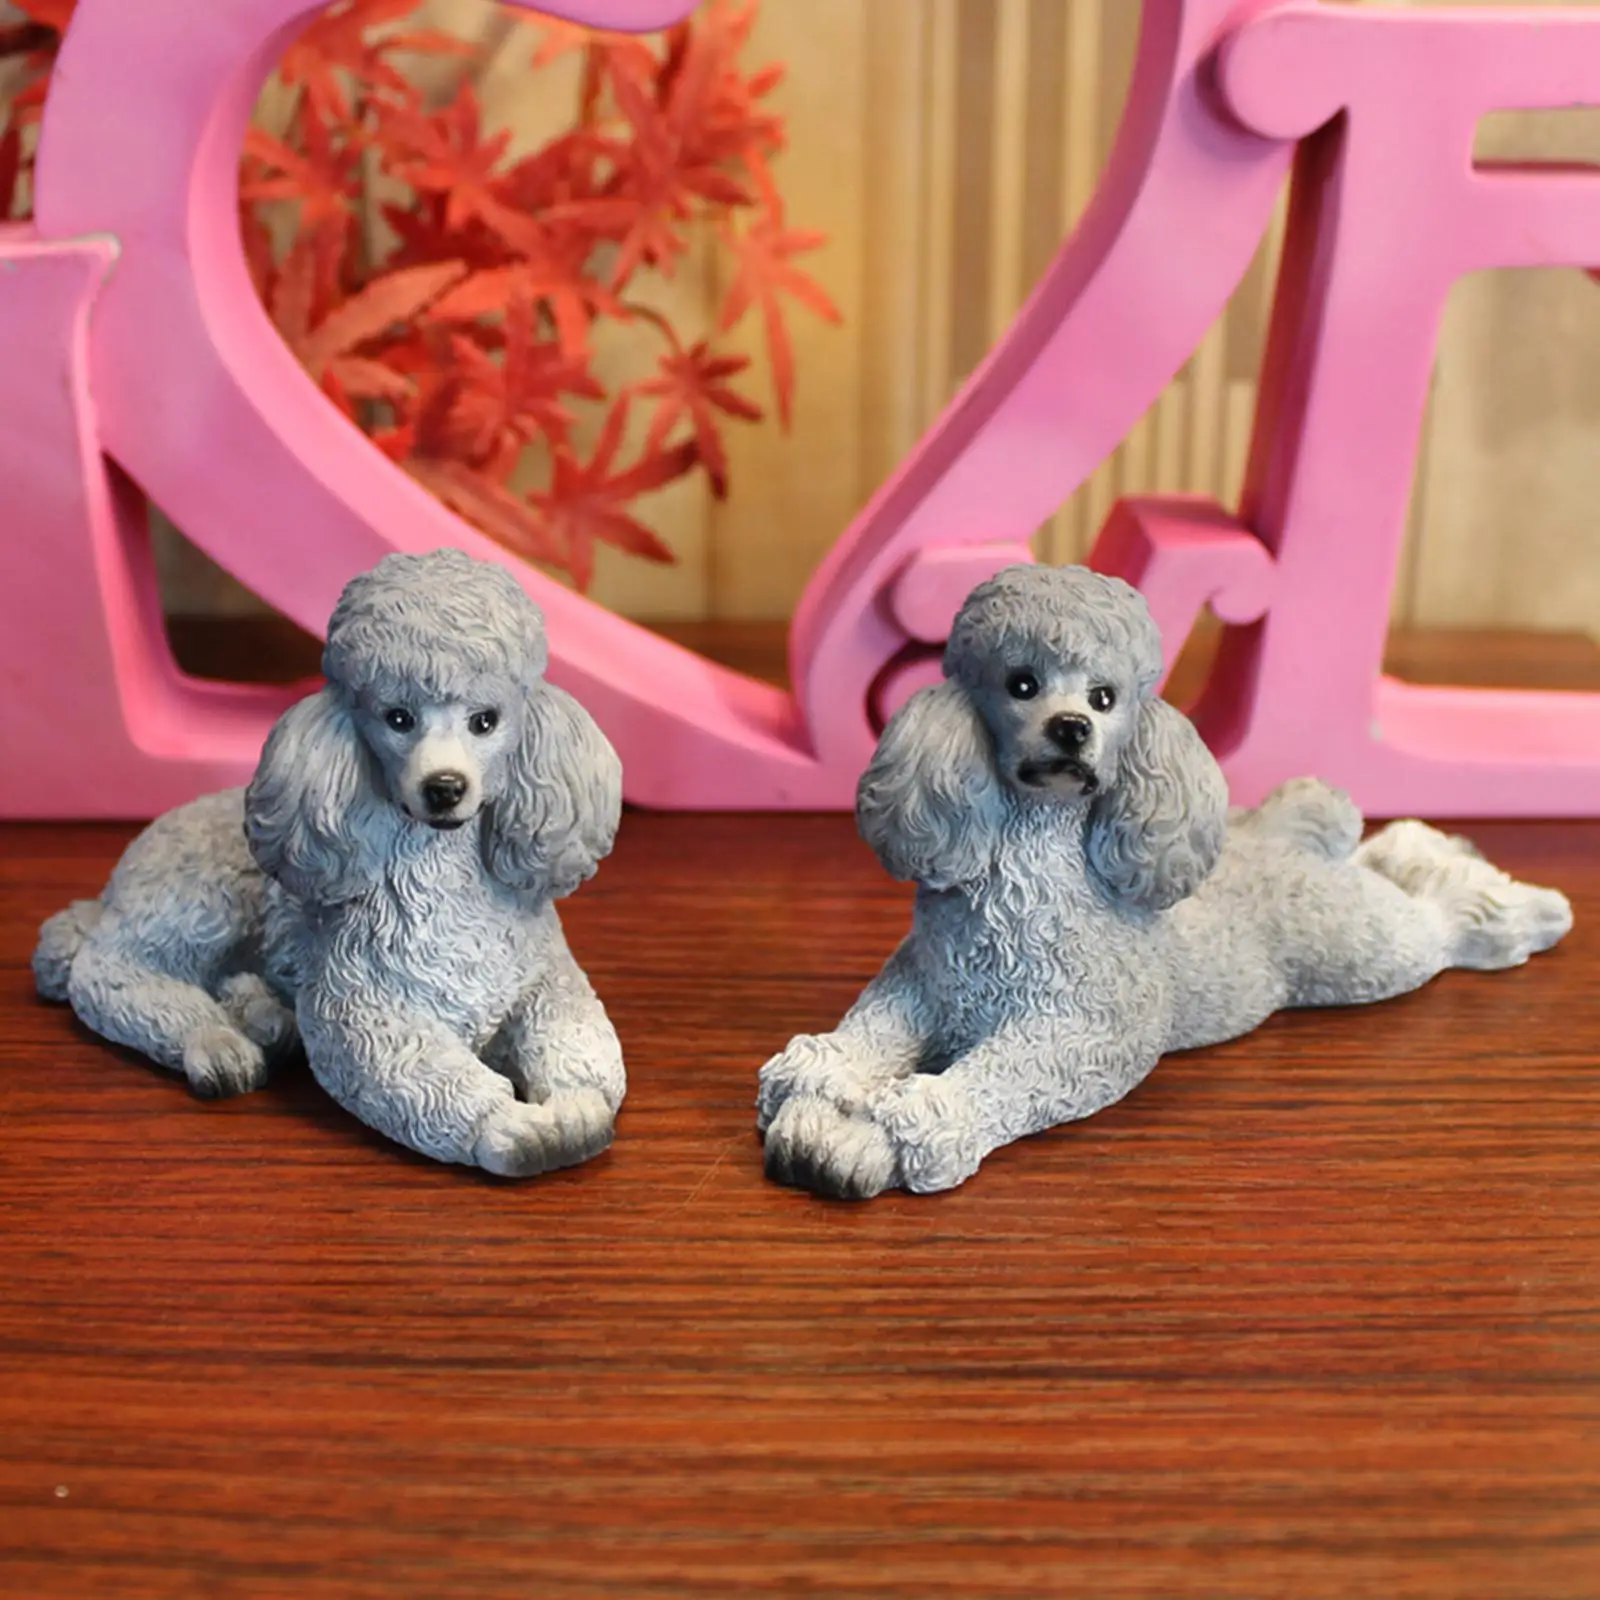 2x Creative Dogs Sculpture Art Crafts Collectable Cute Toy Poodle Dog Statue Pet